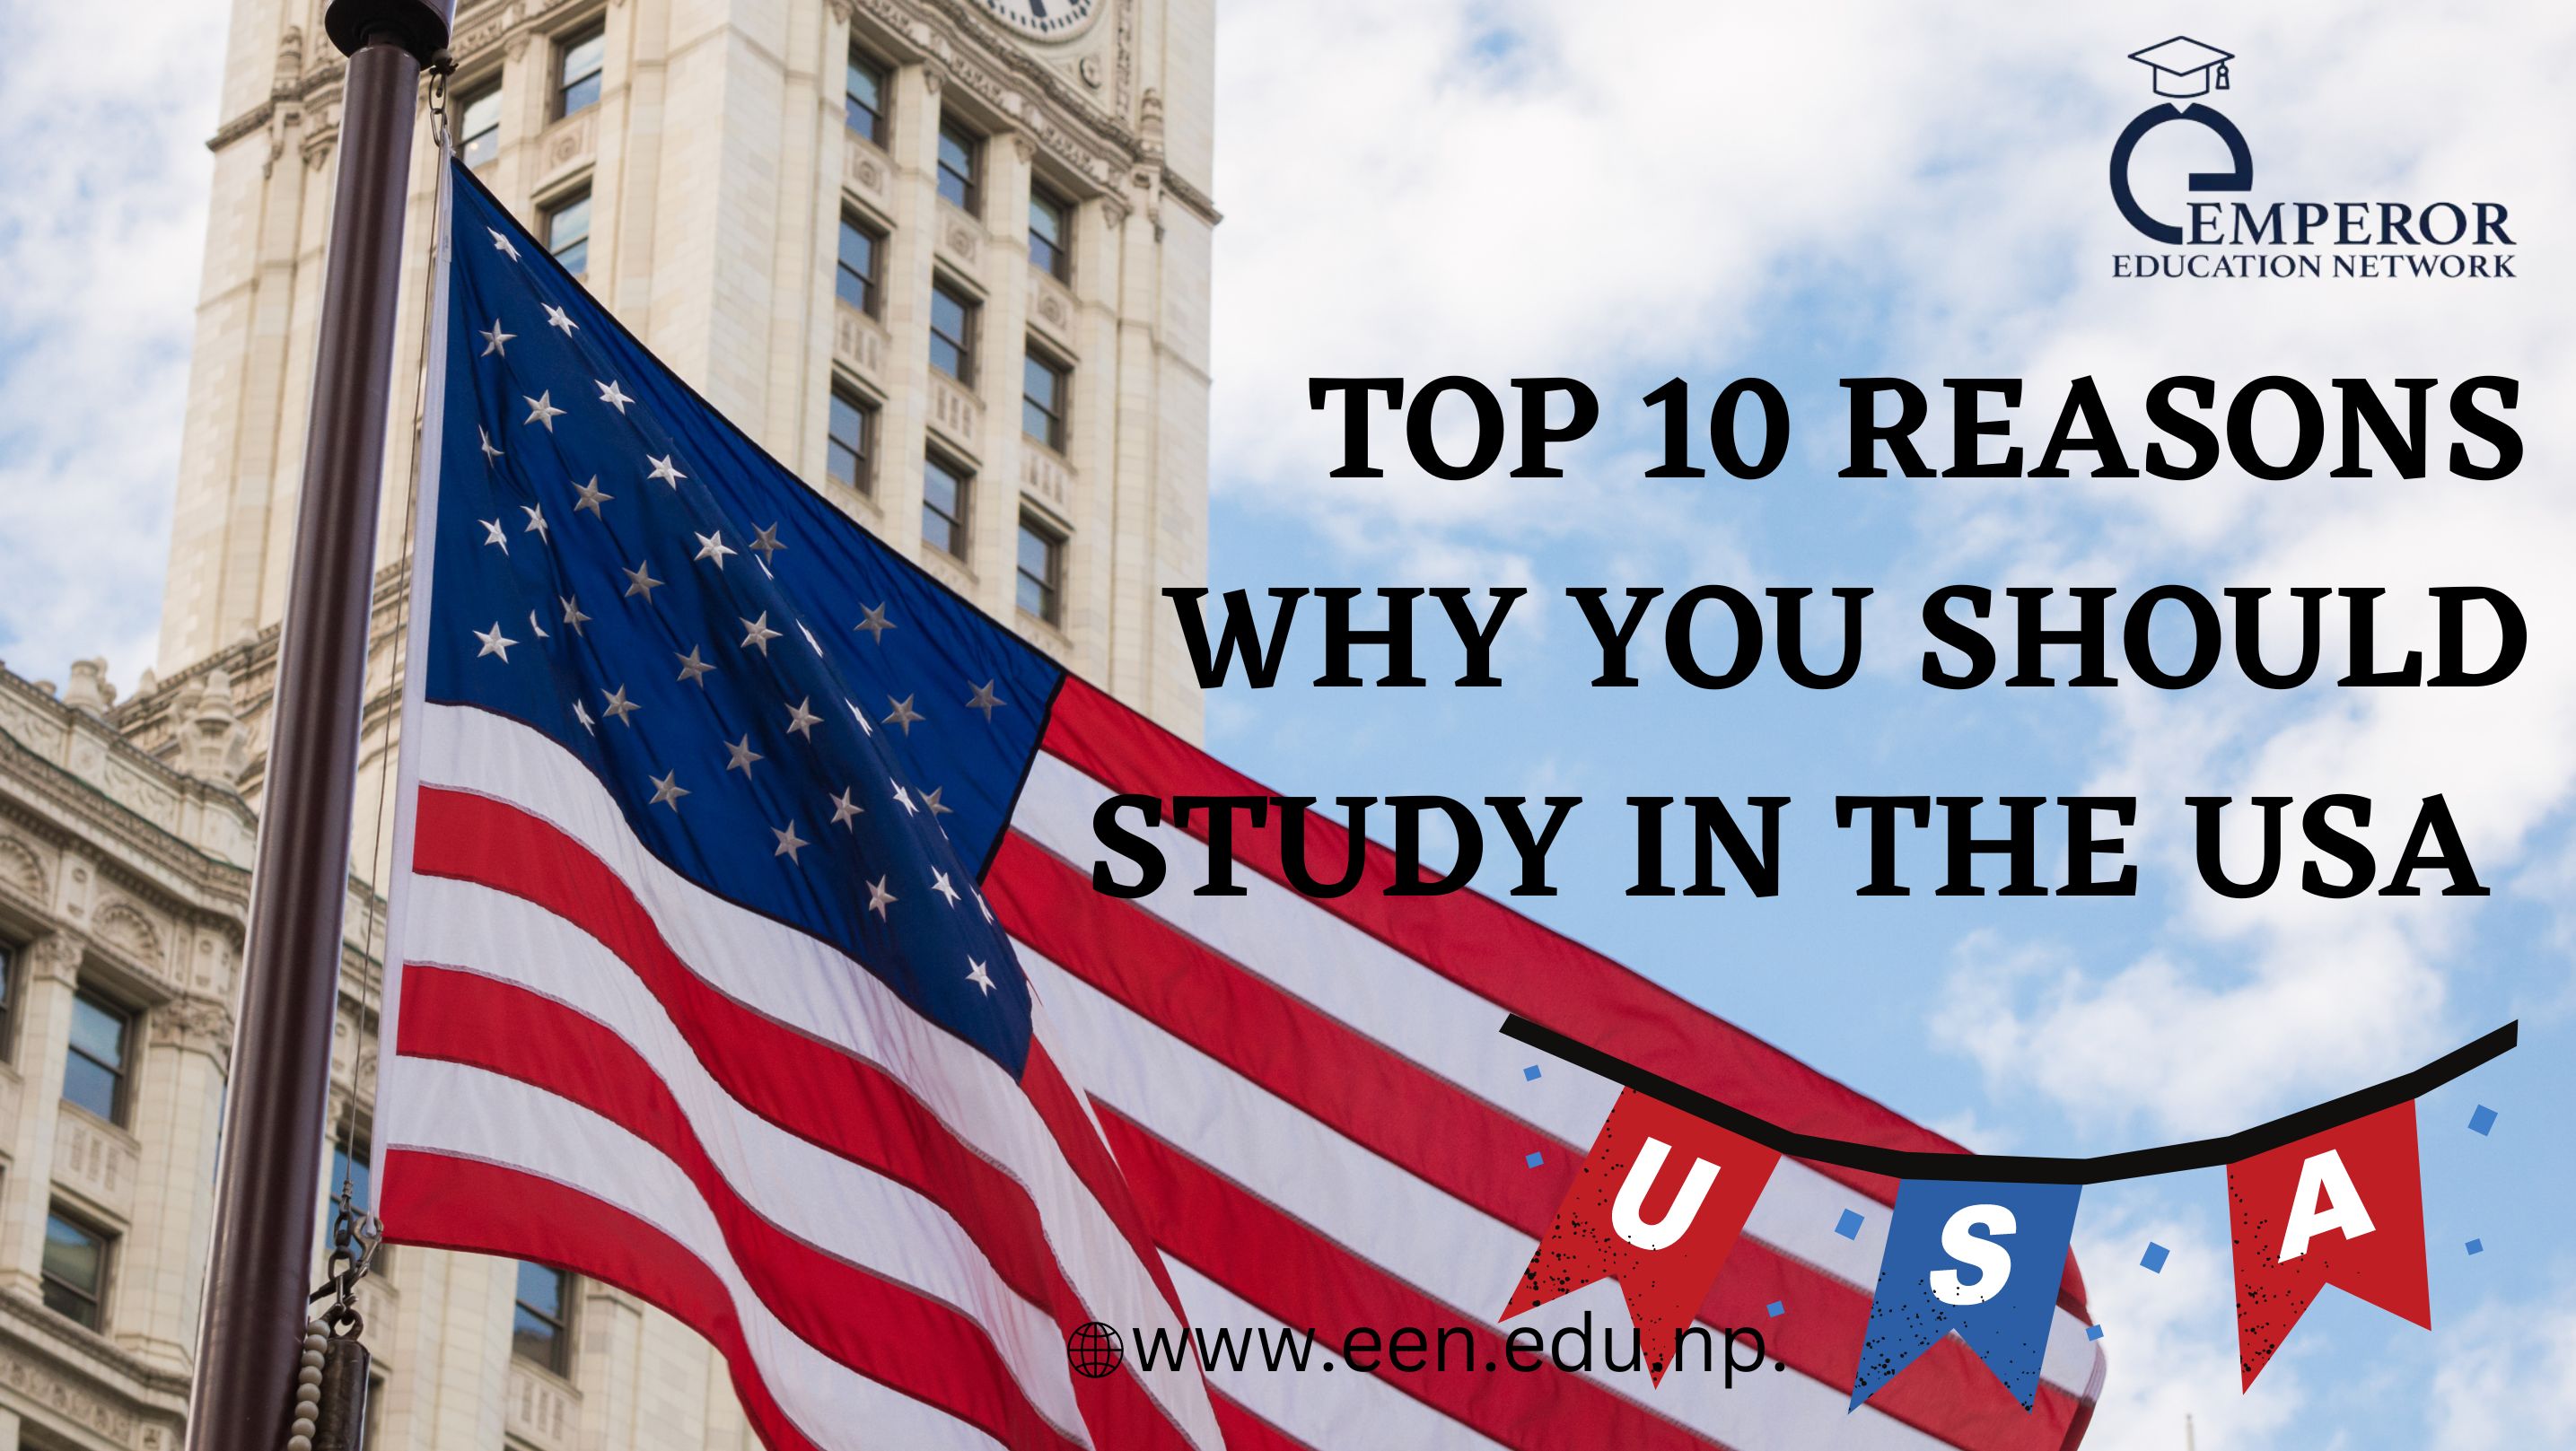 Top 10 Reasons Why You Should Study in the USA